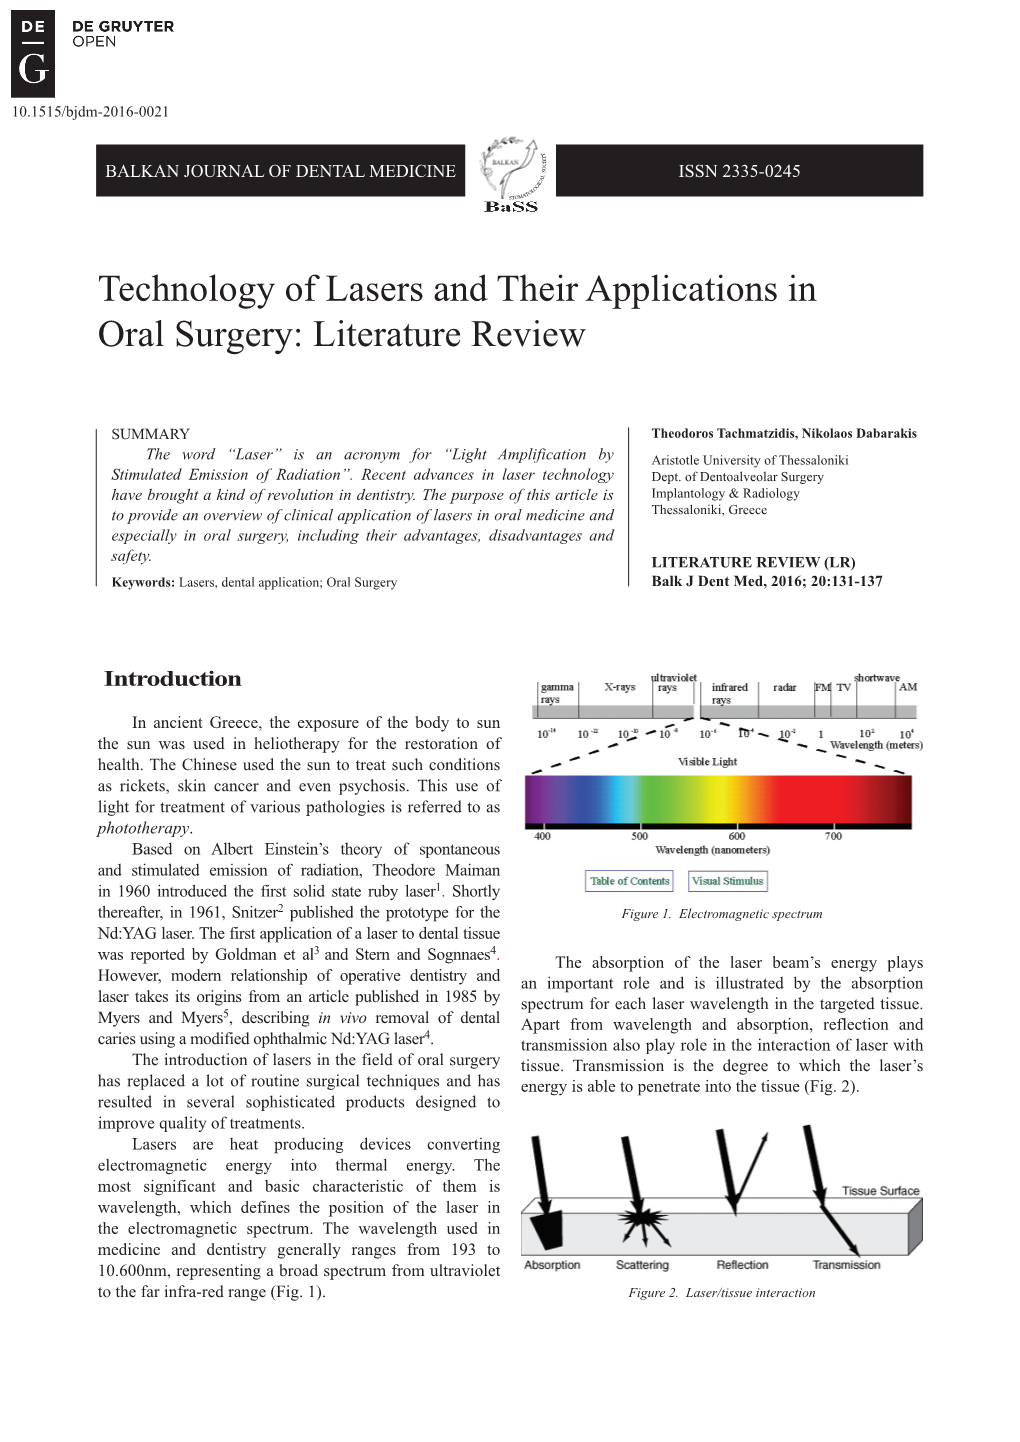 Technology of Lasers and Their Applications in Oral Surgery: Literature Review